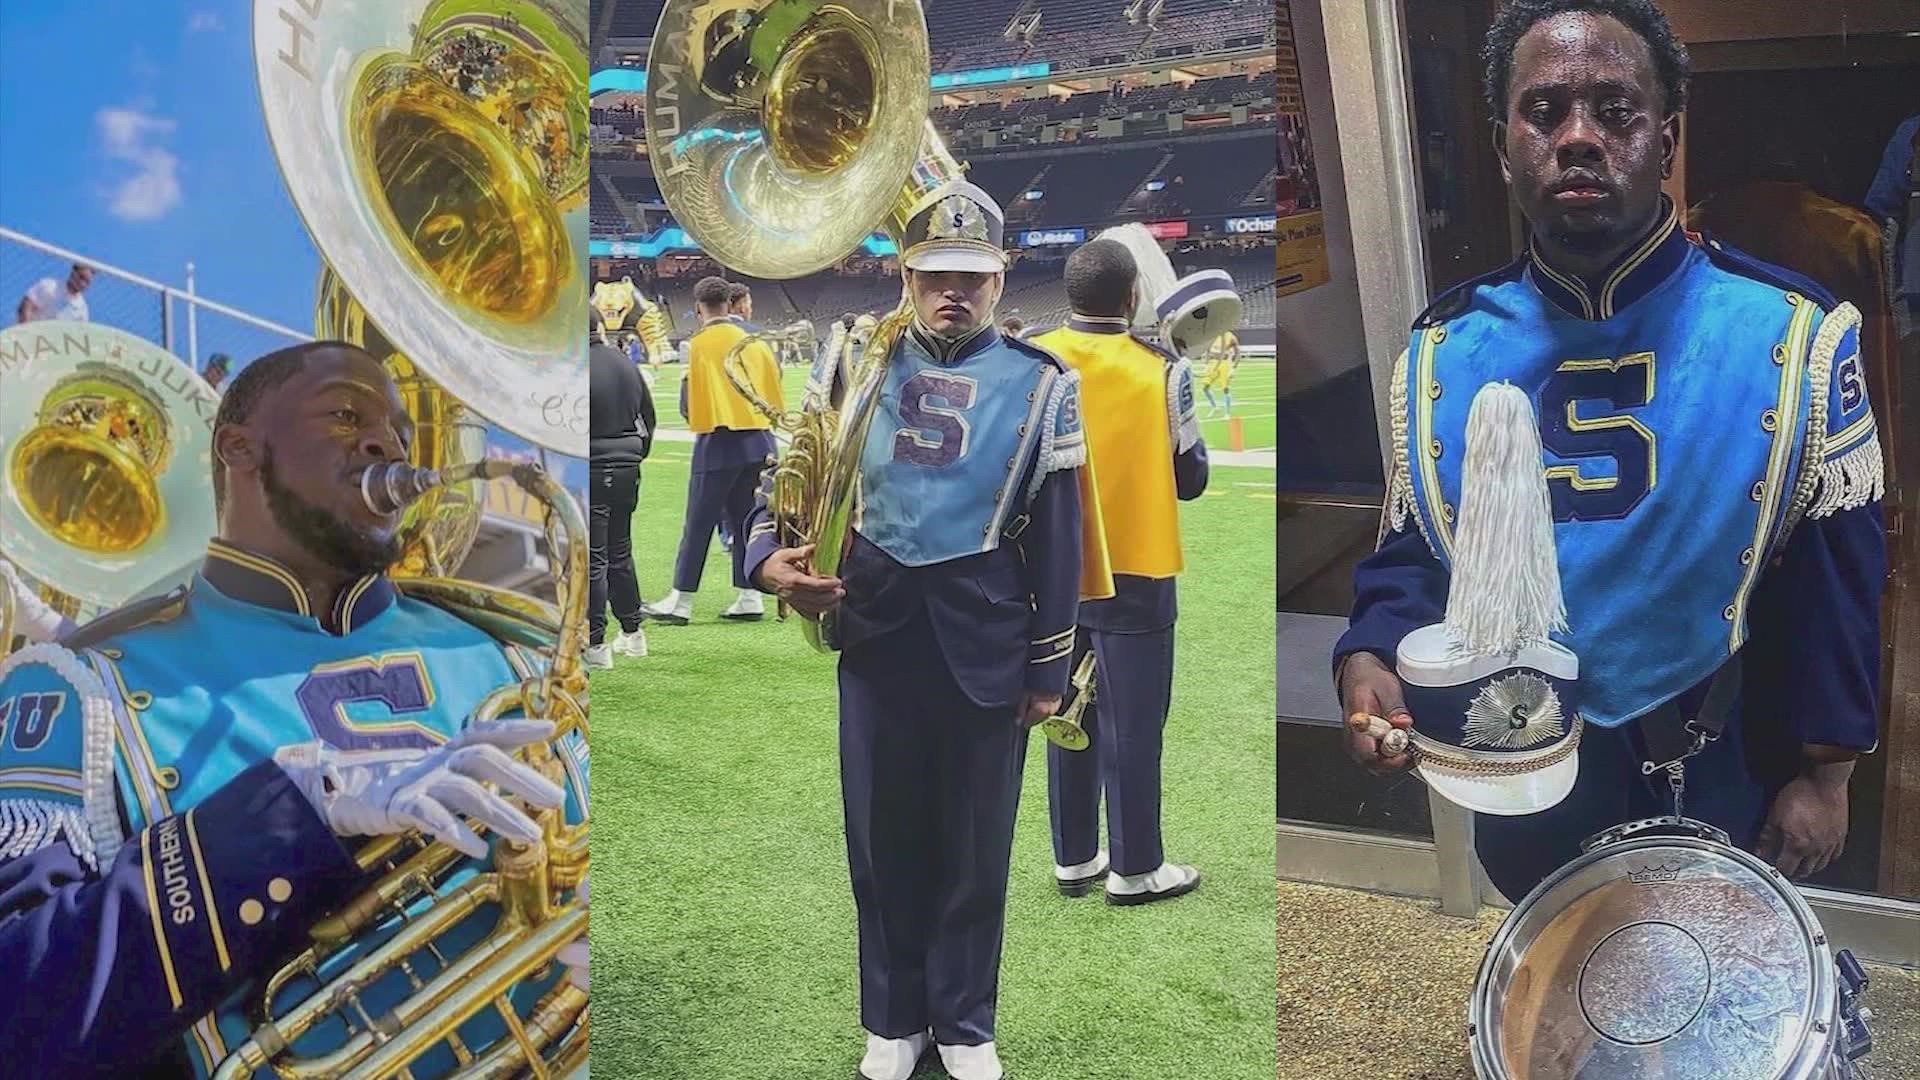 Three members of Southern University’s marching band, known as the Human Jukebox, were killed in a crash with an 18-wheeler.